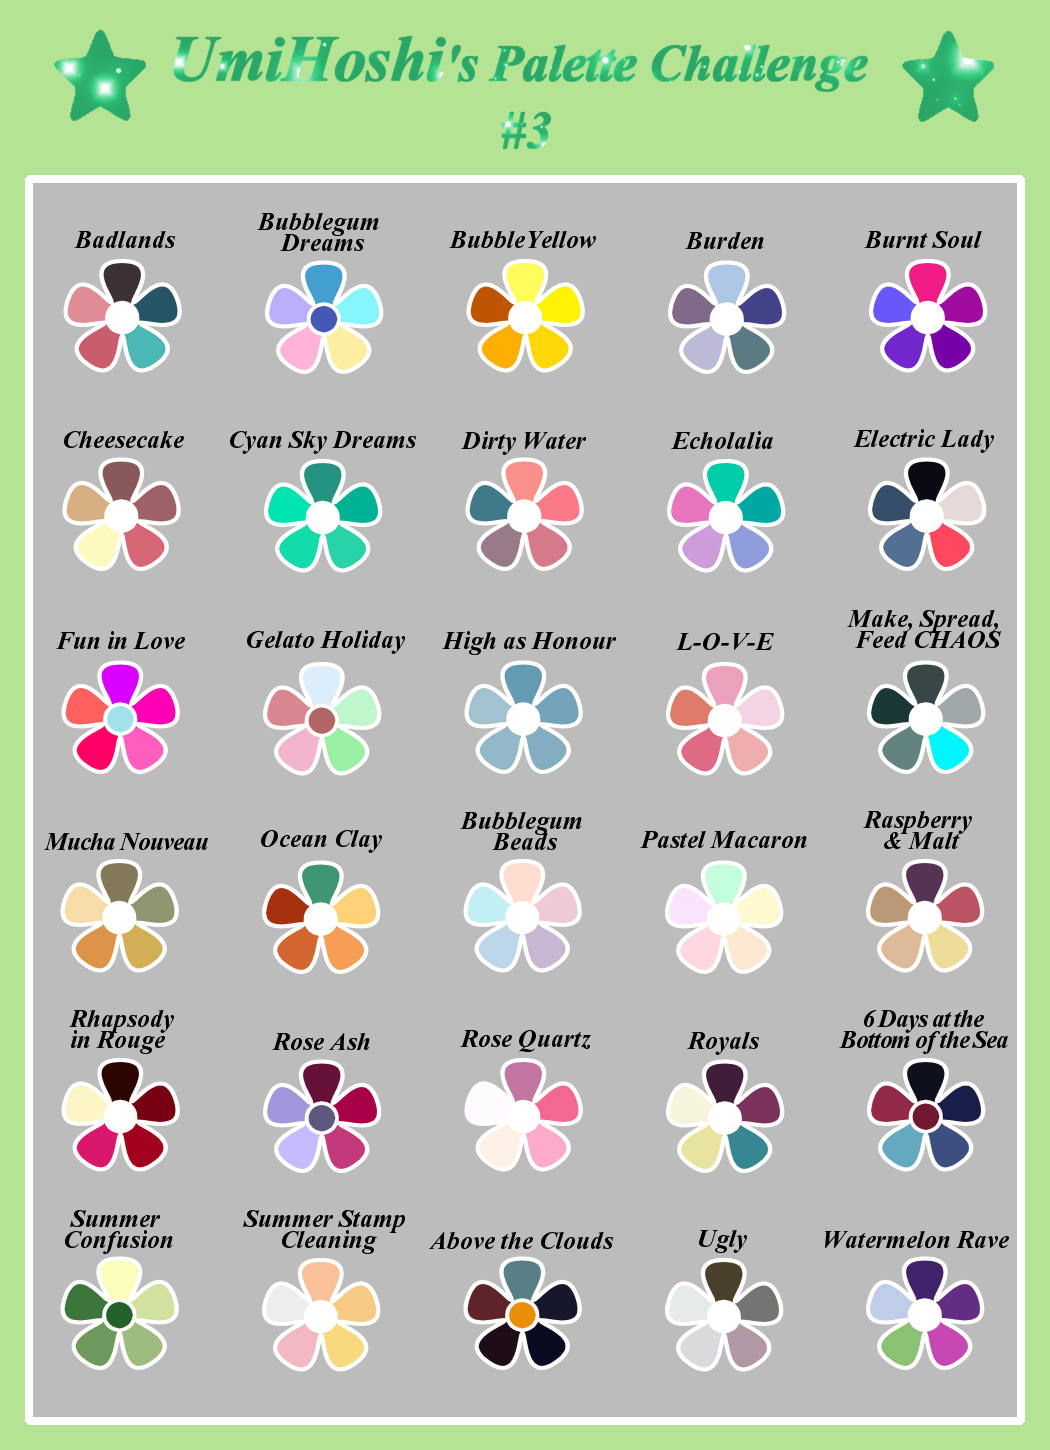 umihoshi-art: “ I’m having a lot of fun doing palette challenges, so I made some of my own~ Feel free to use! All palettes are from @color-palettes ”